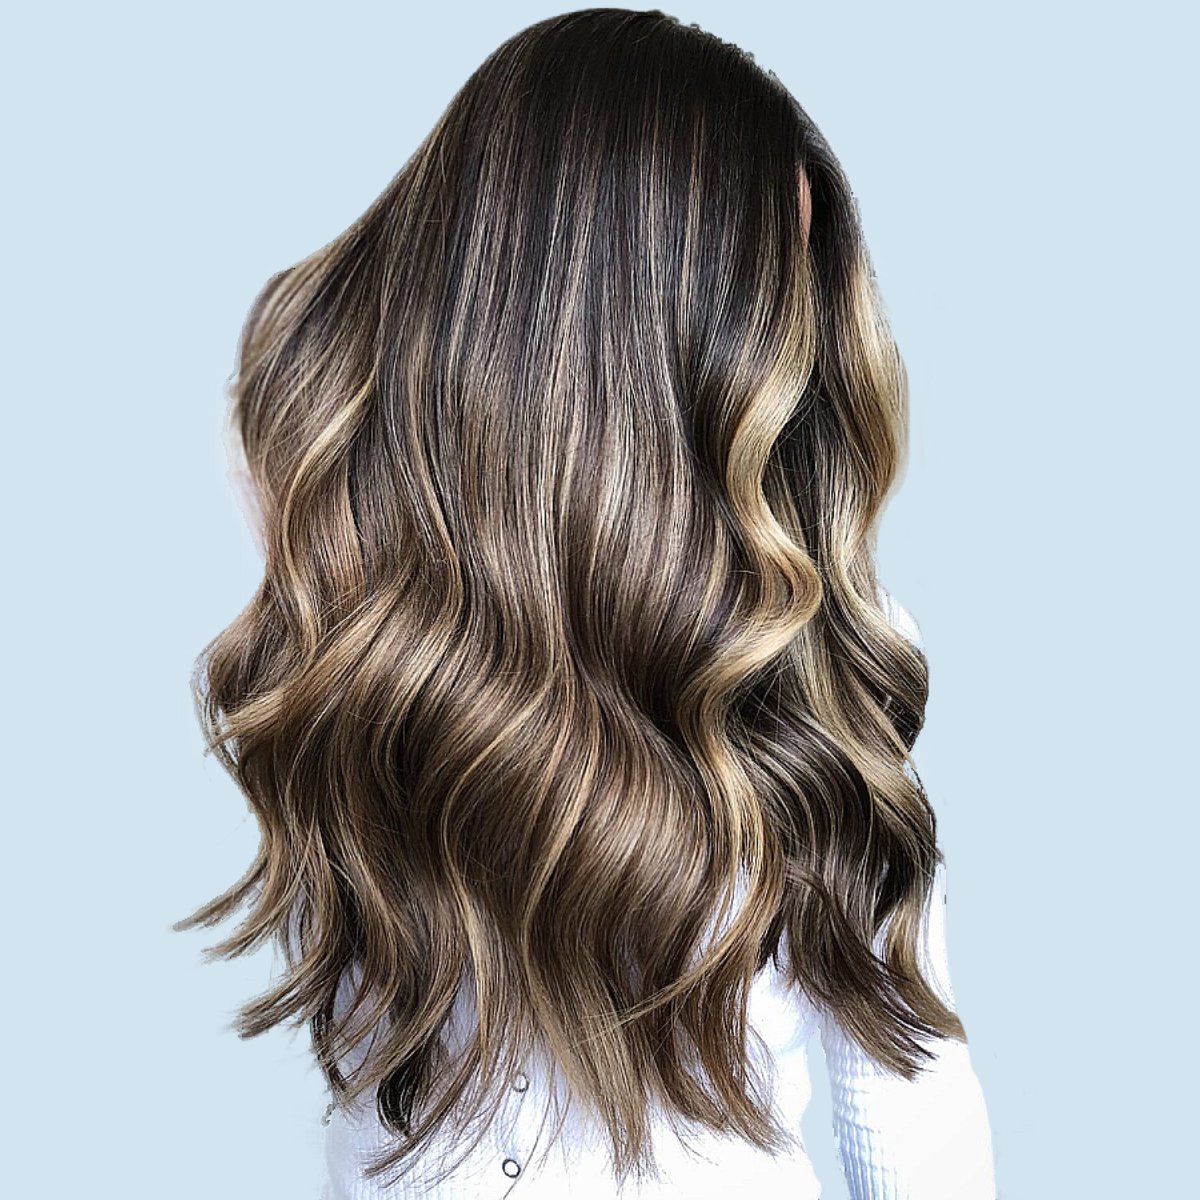 High contrast brown to blonde ombre! Obsessed with this look and the curls!